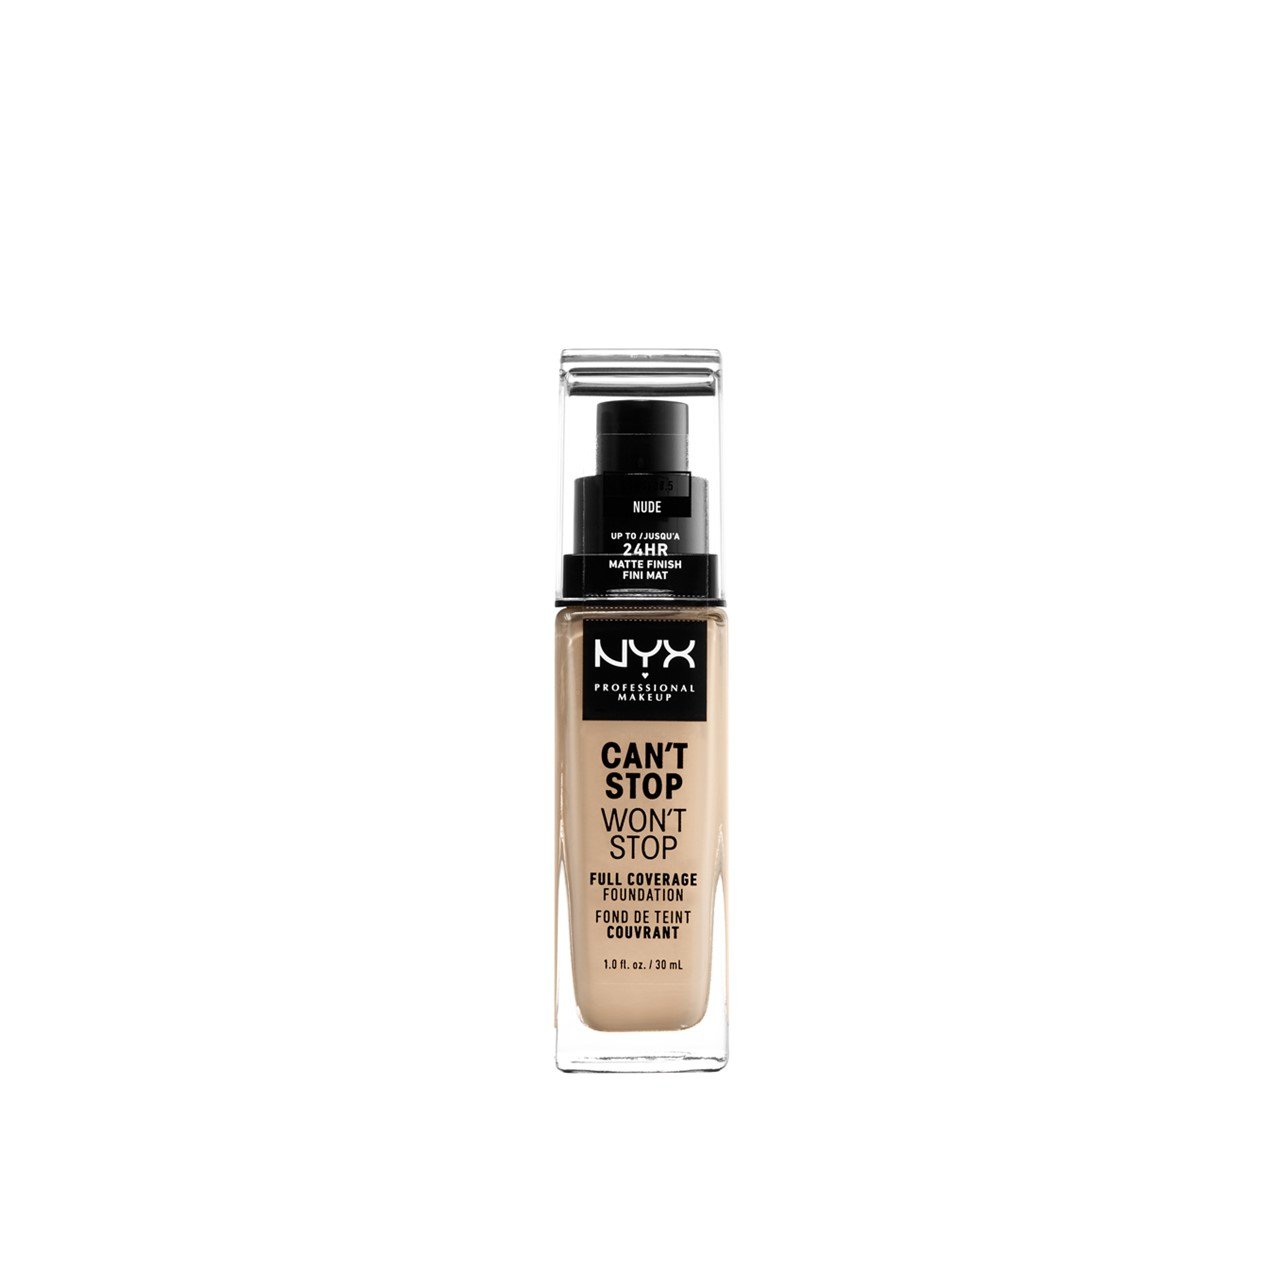 NYX Pro Makeup Can't Stop Won't Stop Foundation Nude 30ml (1.01fl oz)